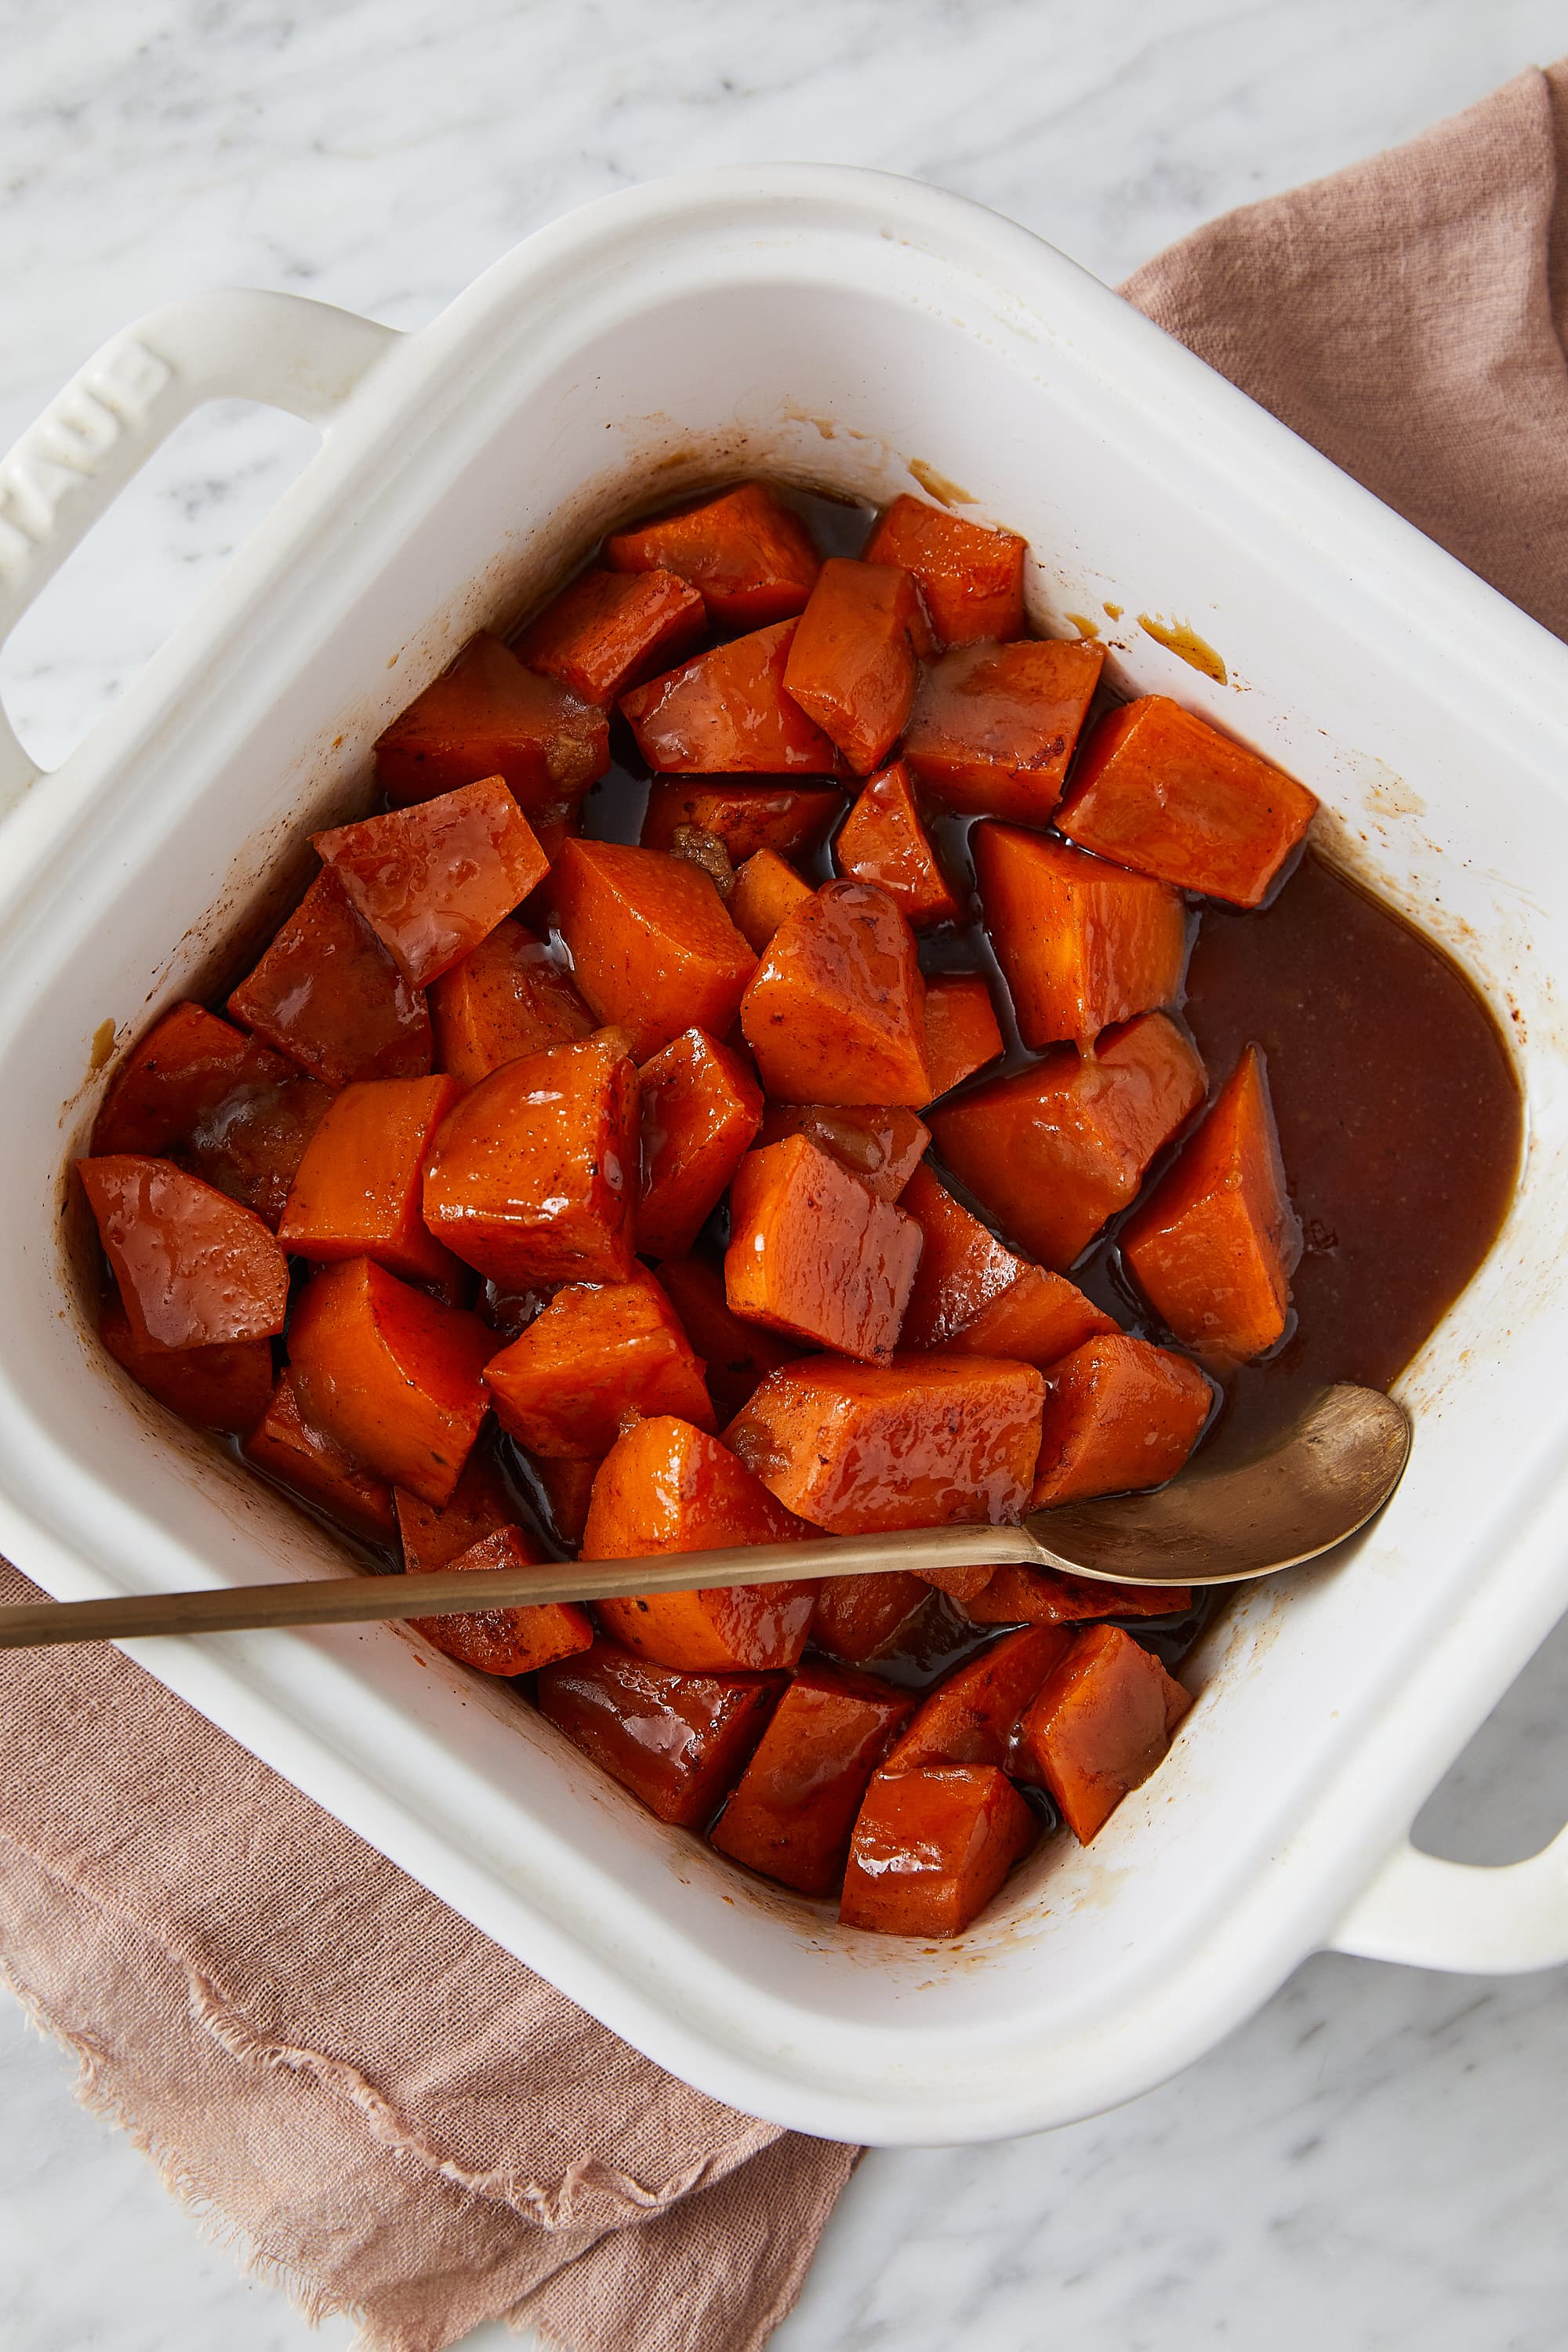 How to Make the Best Candied Yams